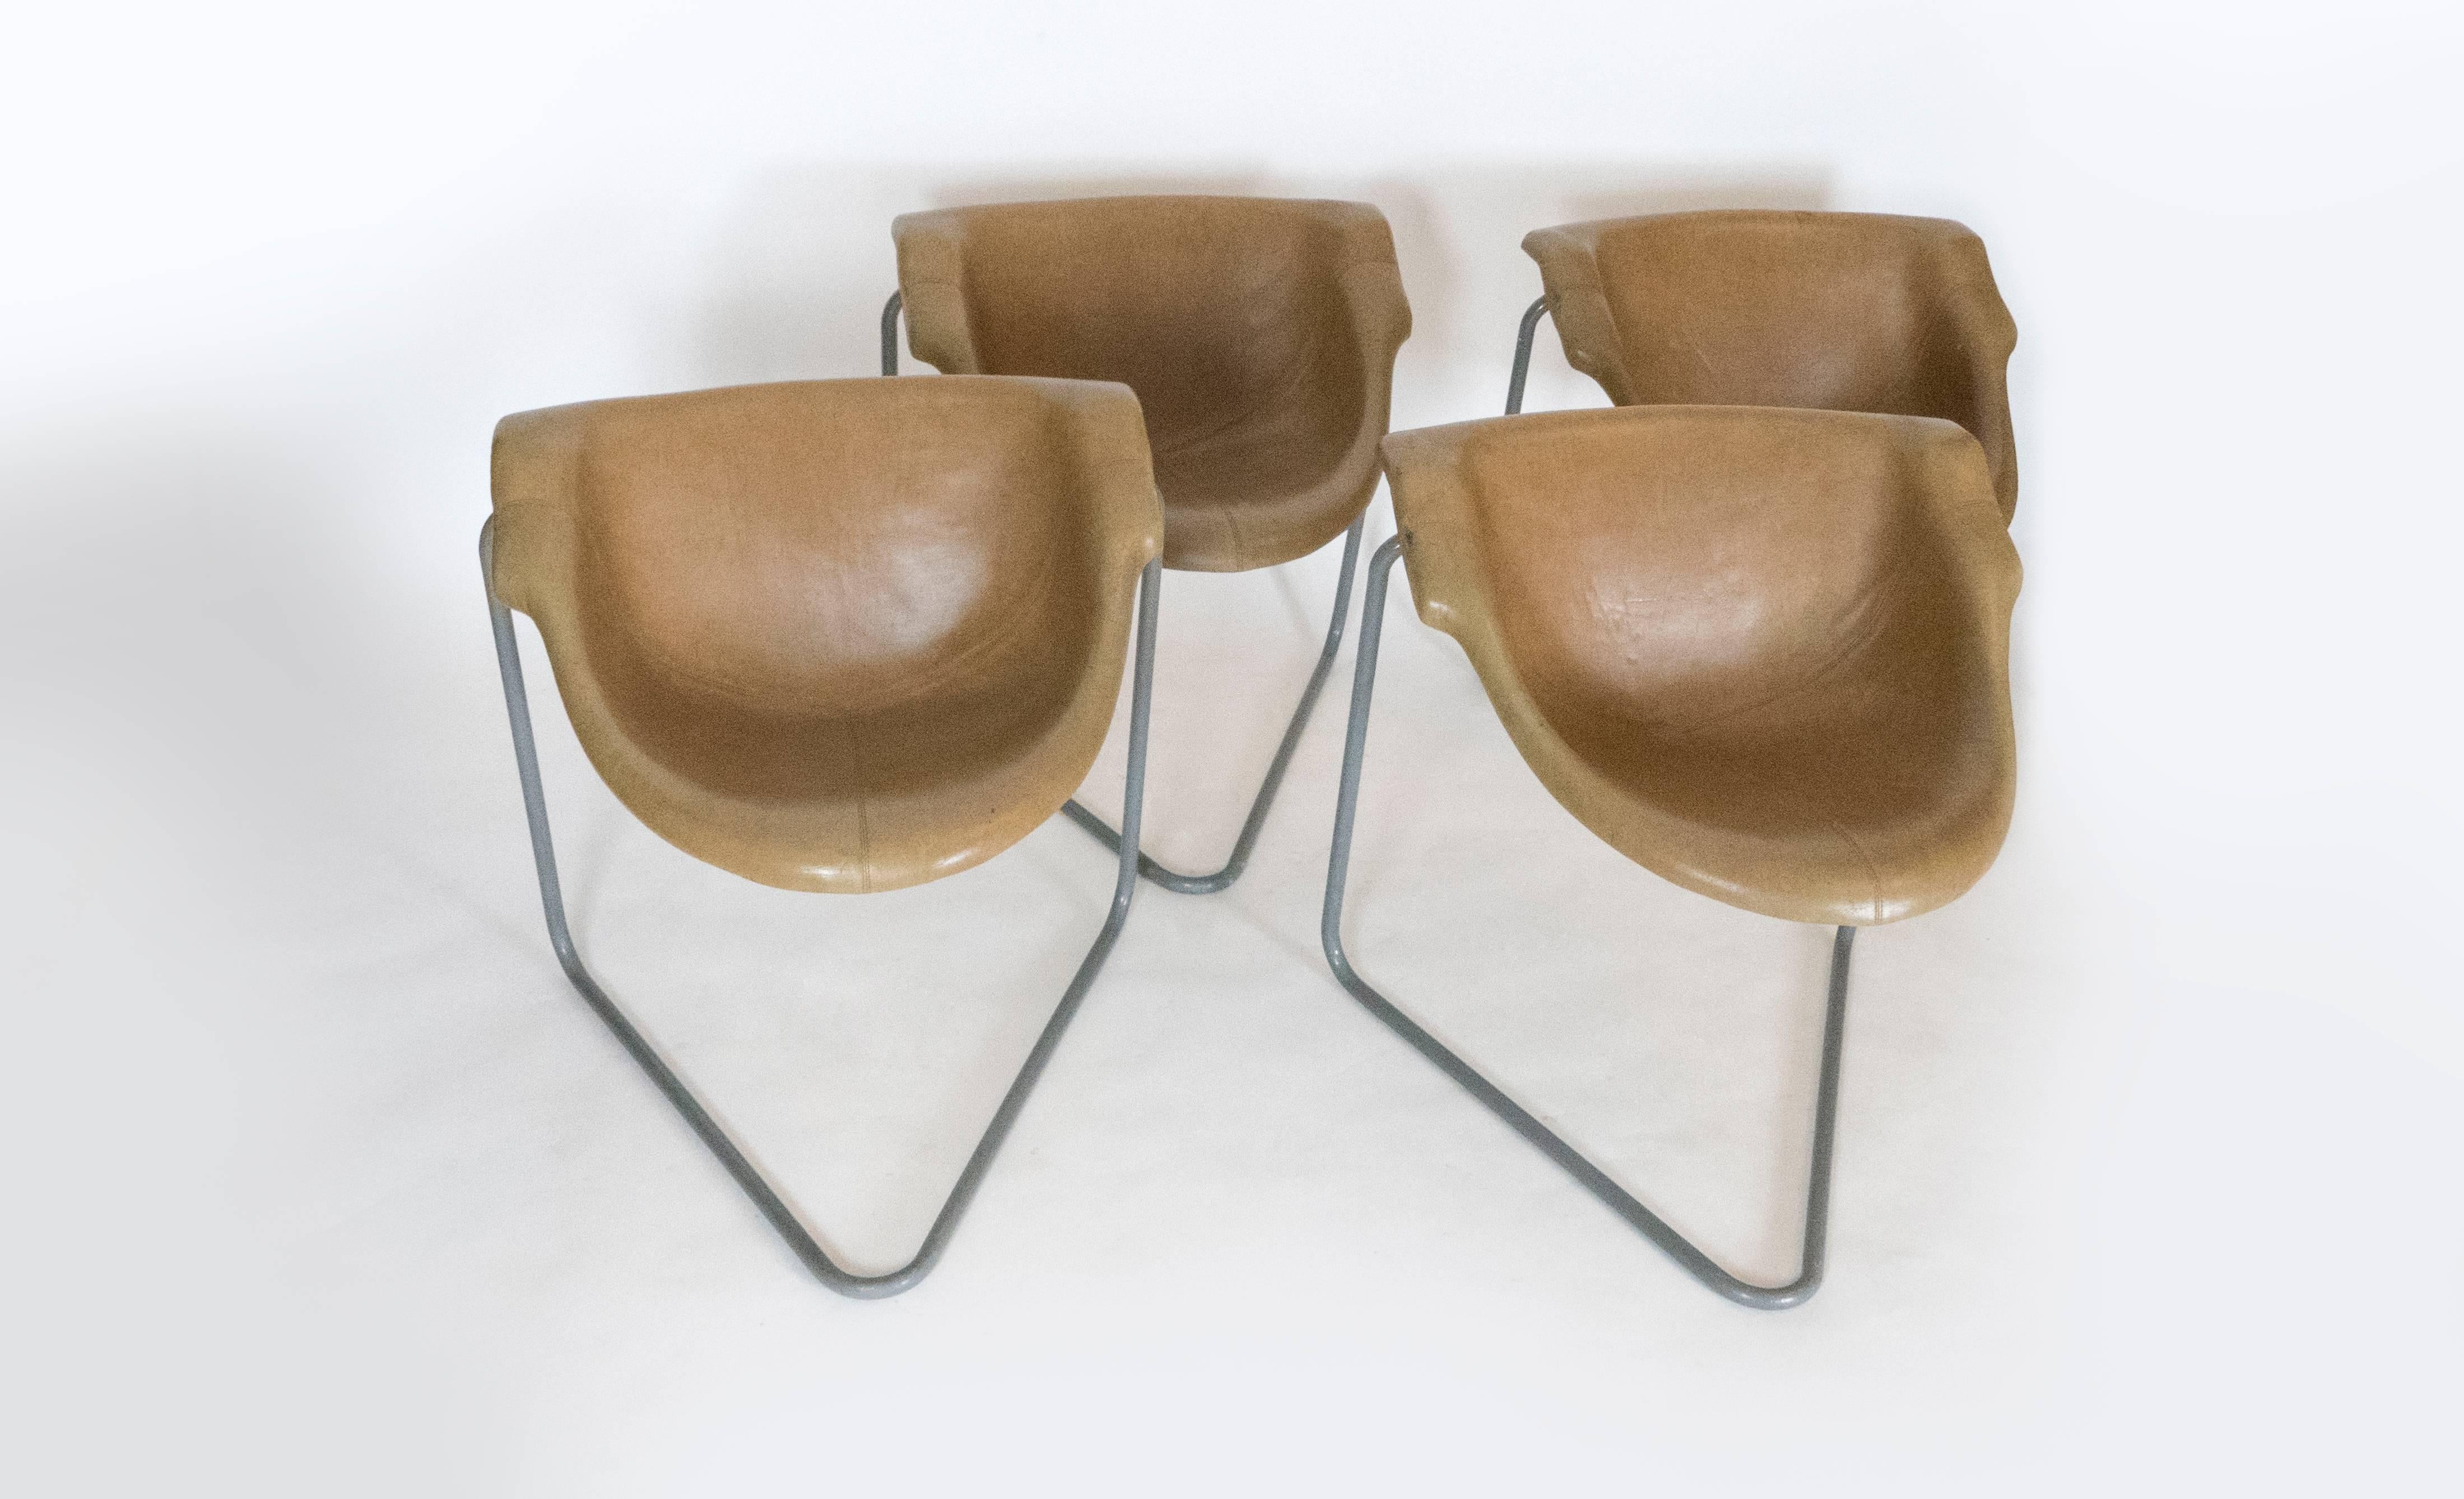 These four chairs designed by Kwok Hoi Chan were manufactured by Steiner. The cantilevered design of the legs and the molded plastic seat provide for a comfortable seat. The chairs have a beautiful aged patina and stitched details.   Items are in